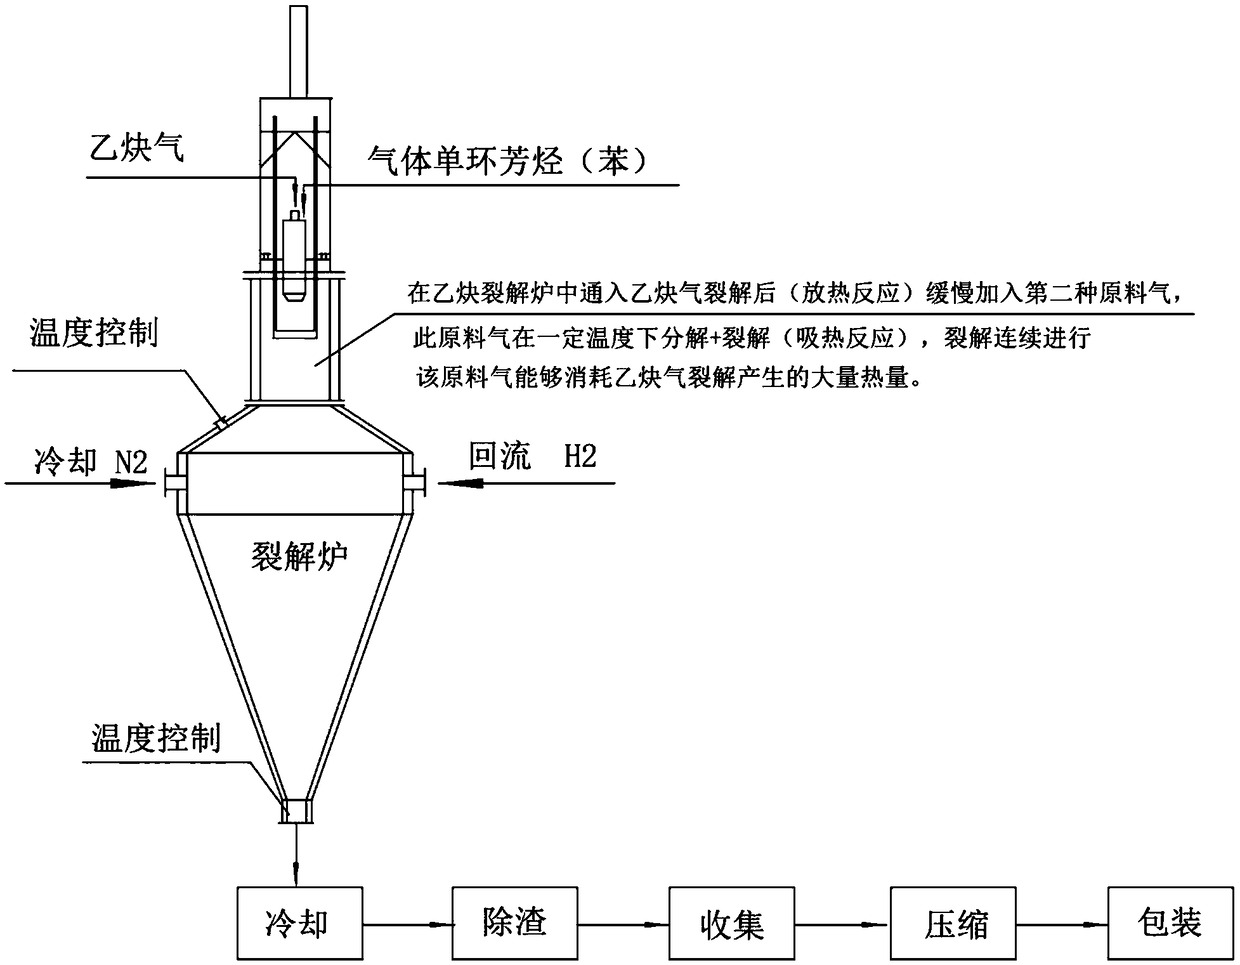 Production process of expanding single line capacity of acetylene black by mixing gas